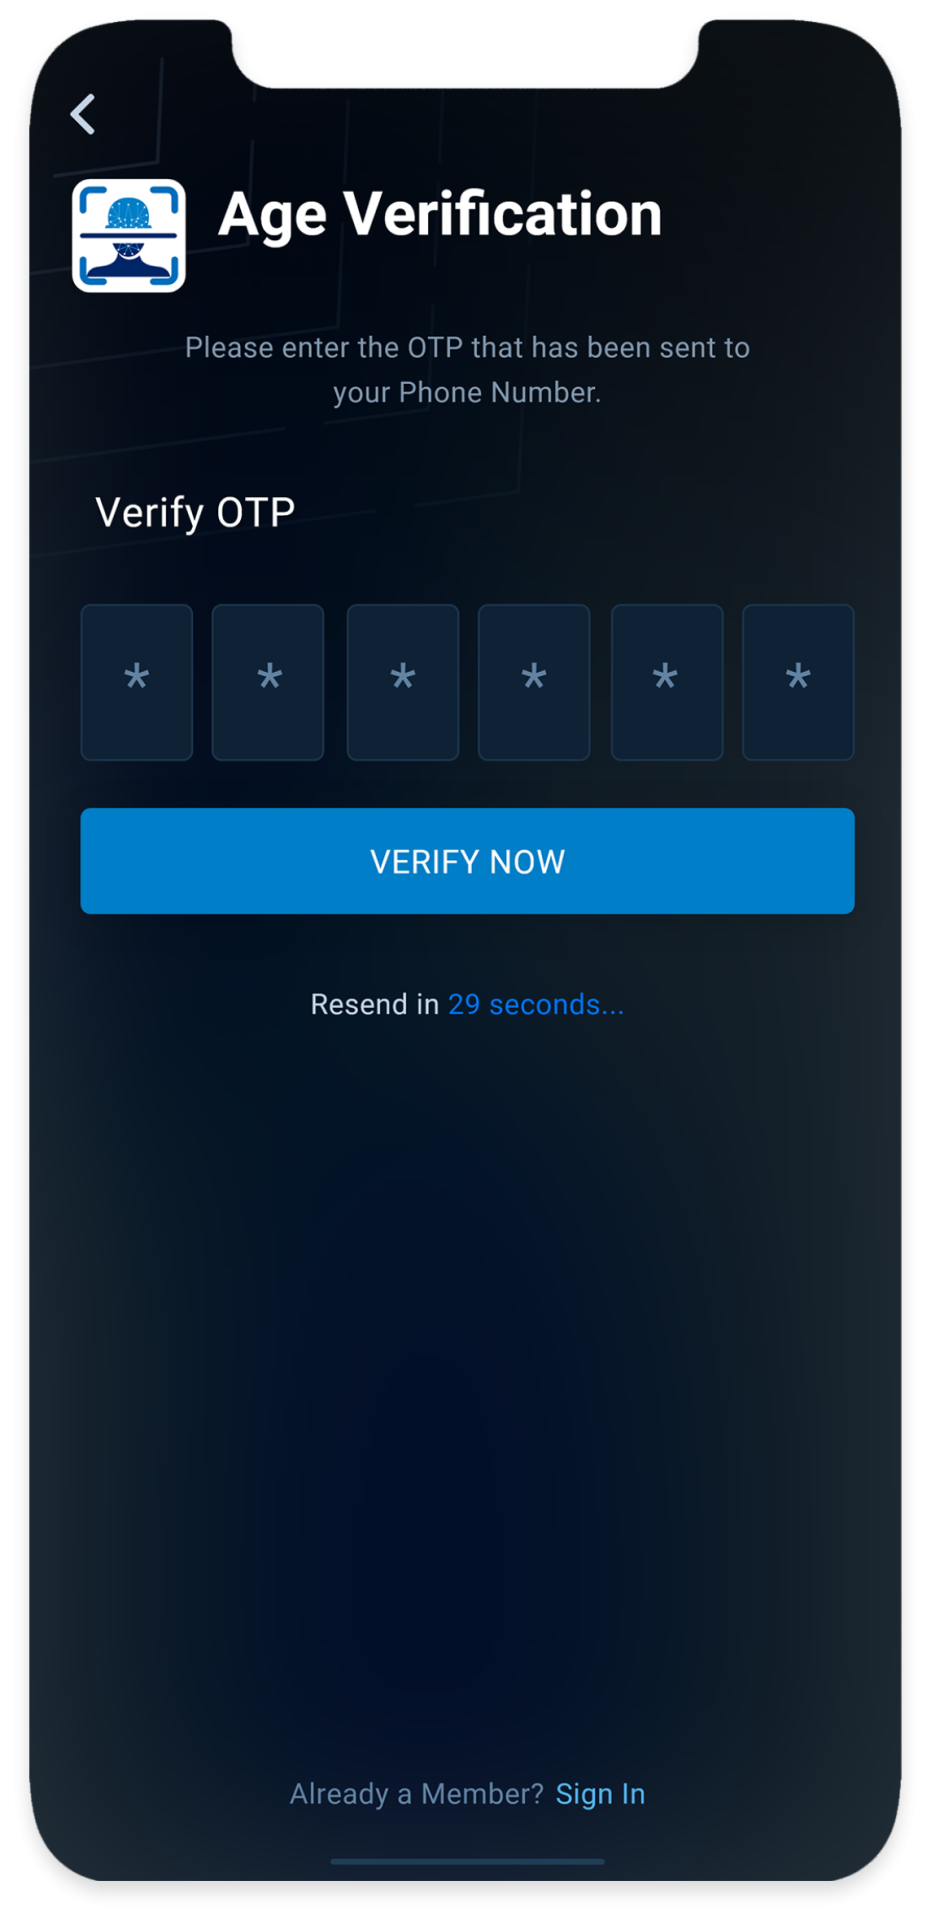 Enter the one-time verification code you receive via text or email to complete the age verification process